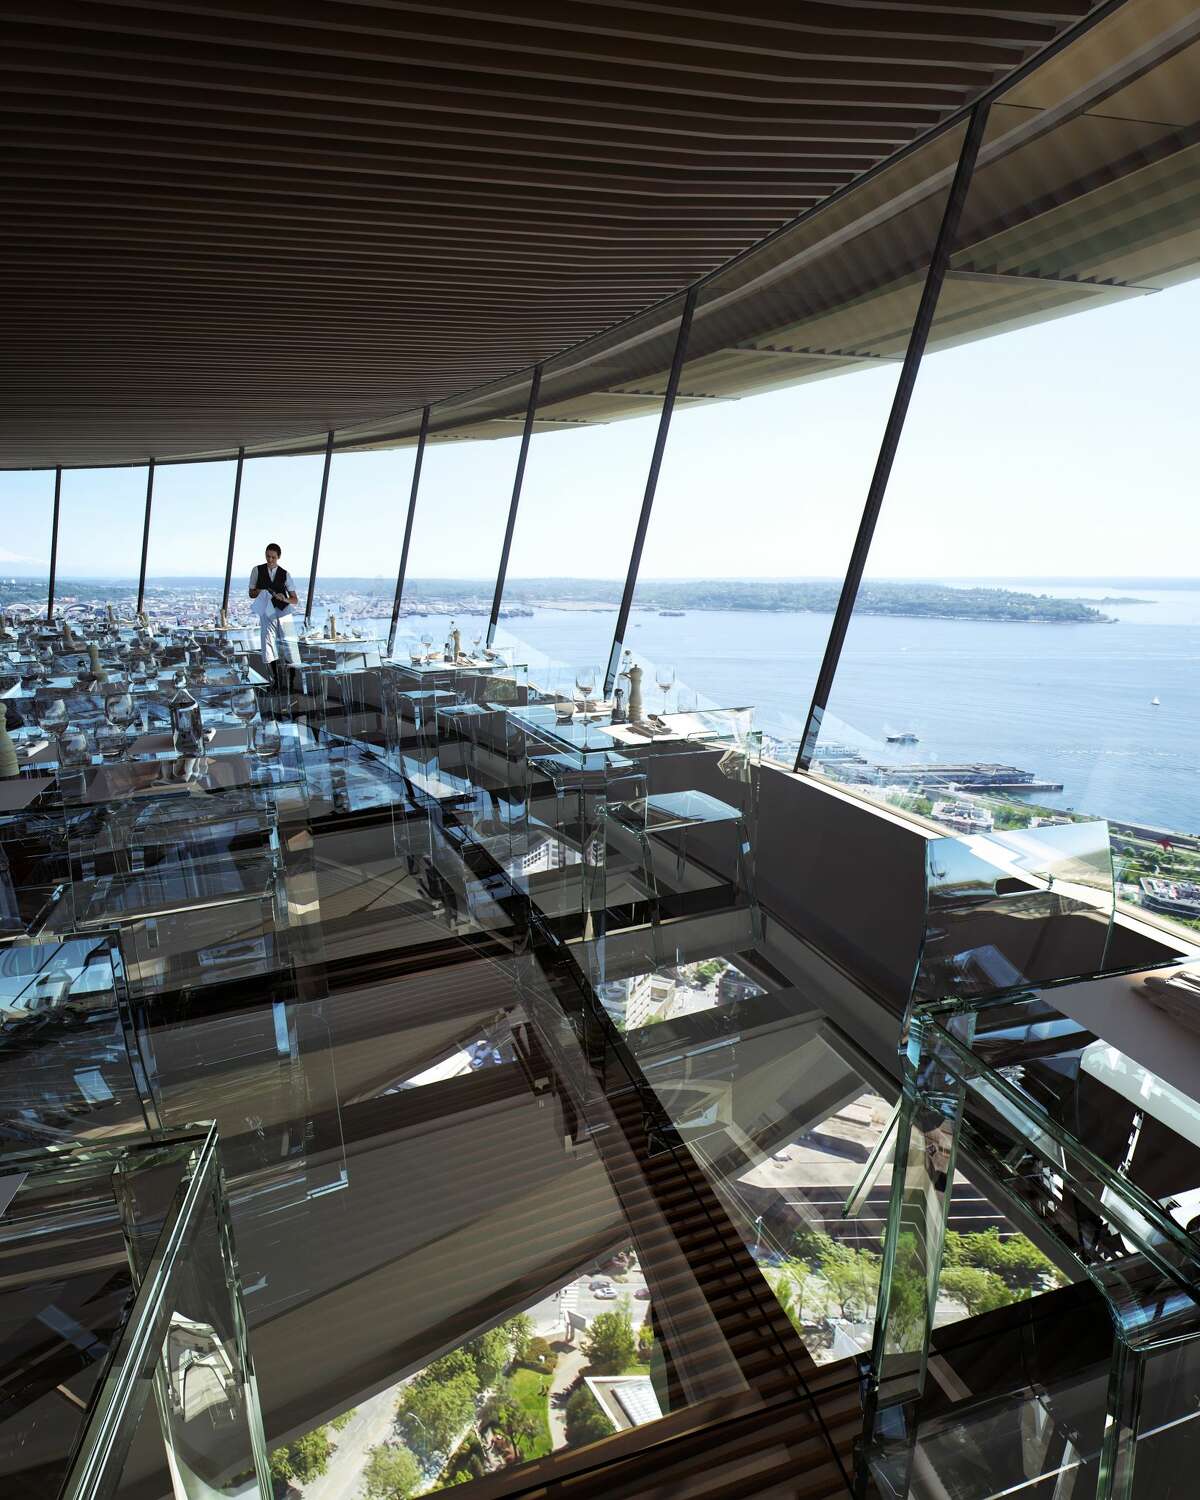 The Century Project Restaurant Rendering - Image by MIR - Architectural Design by Olson Kundig